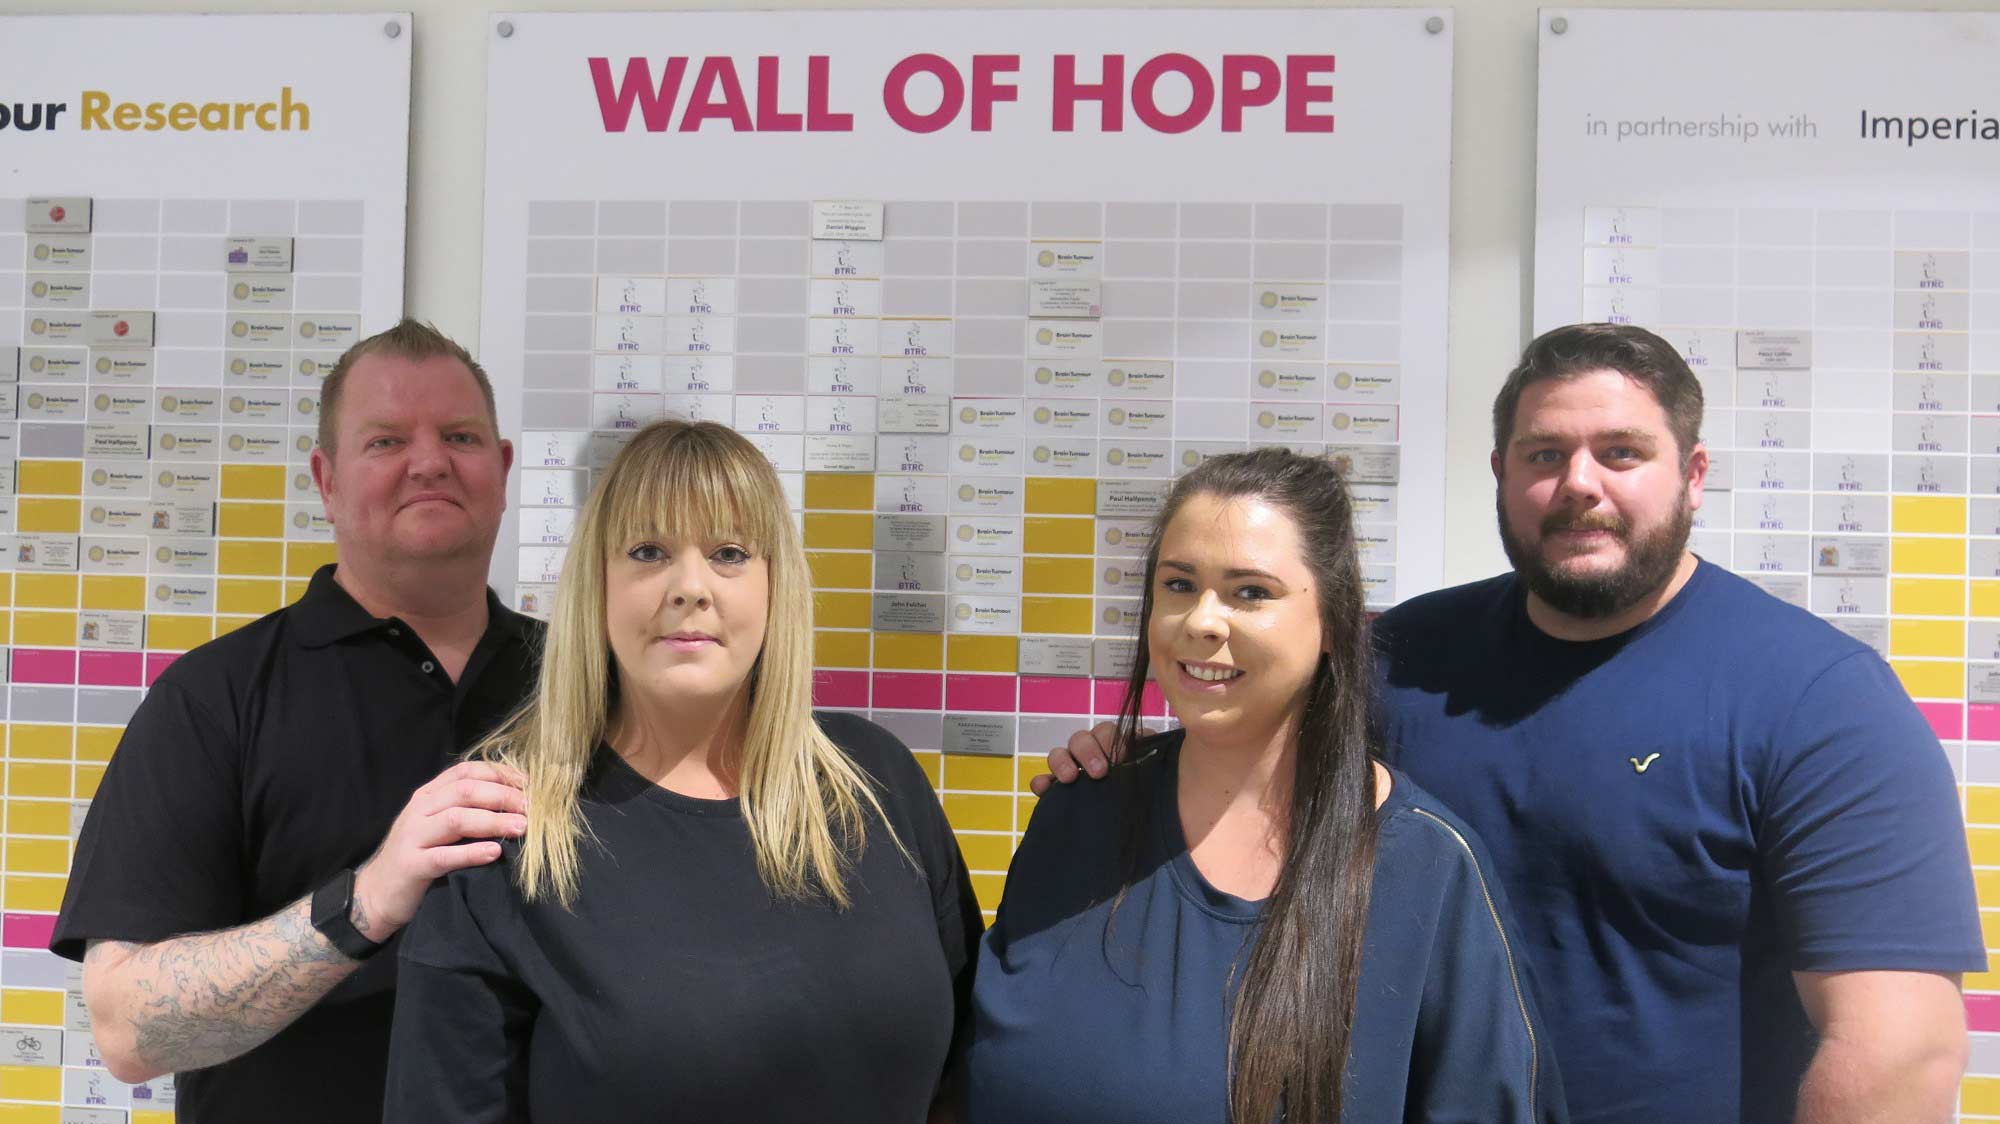 Rebecca and Melissa Foulis with their partners at the Wall of Hope